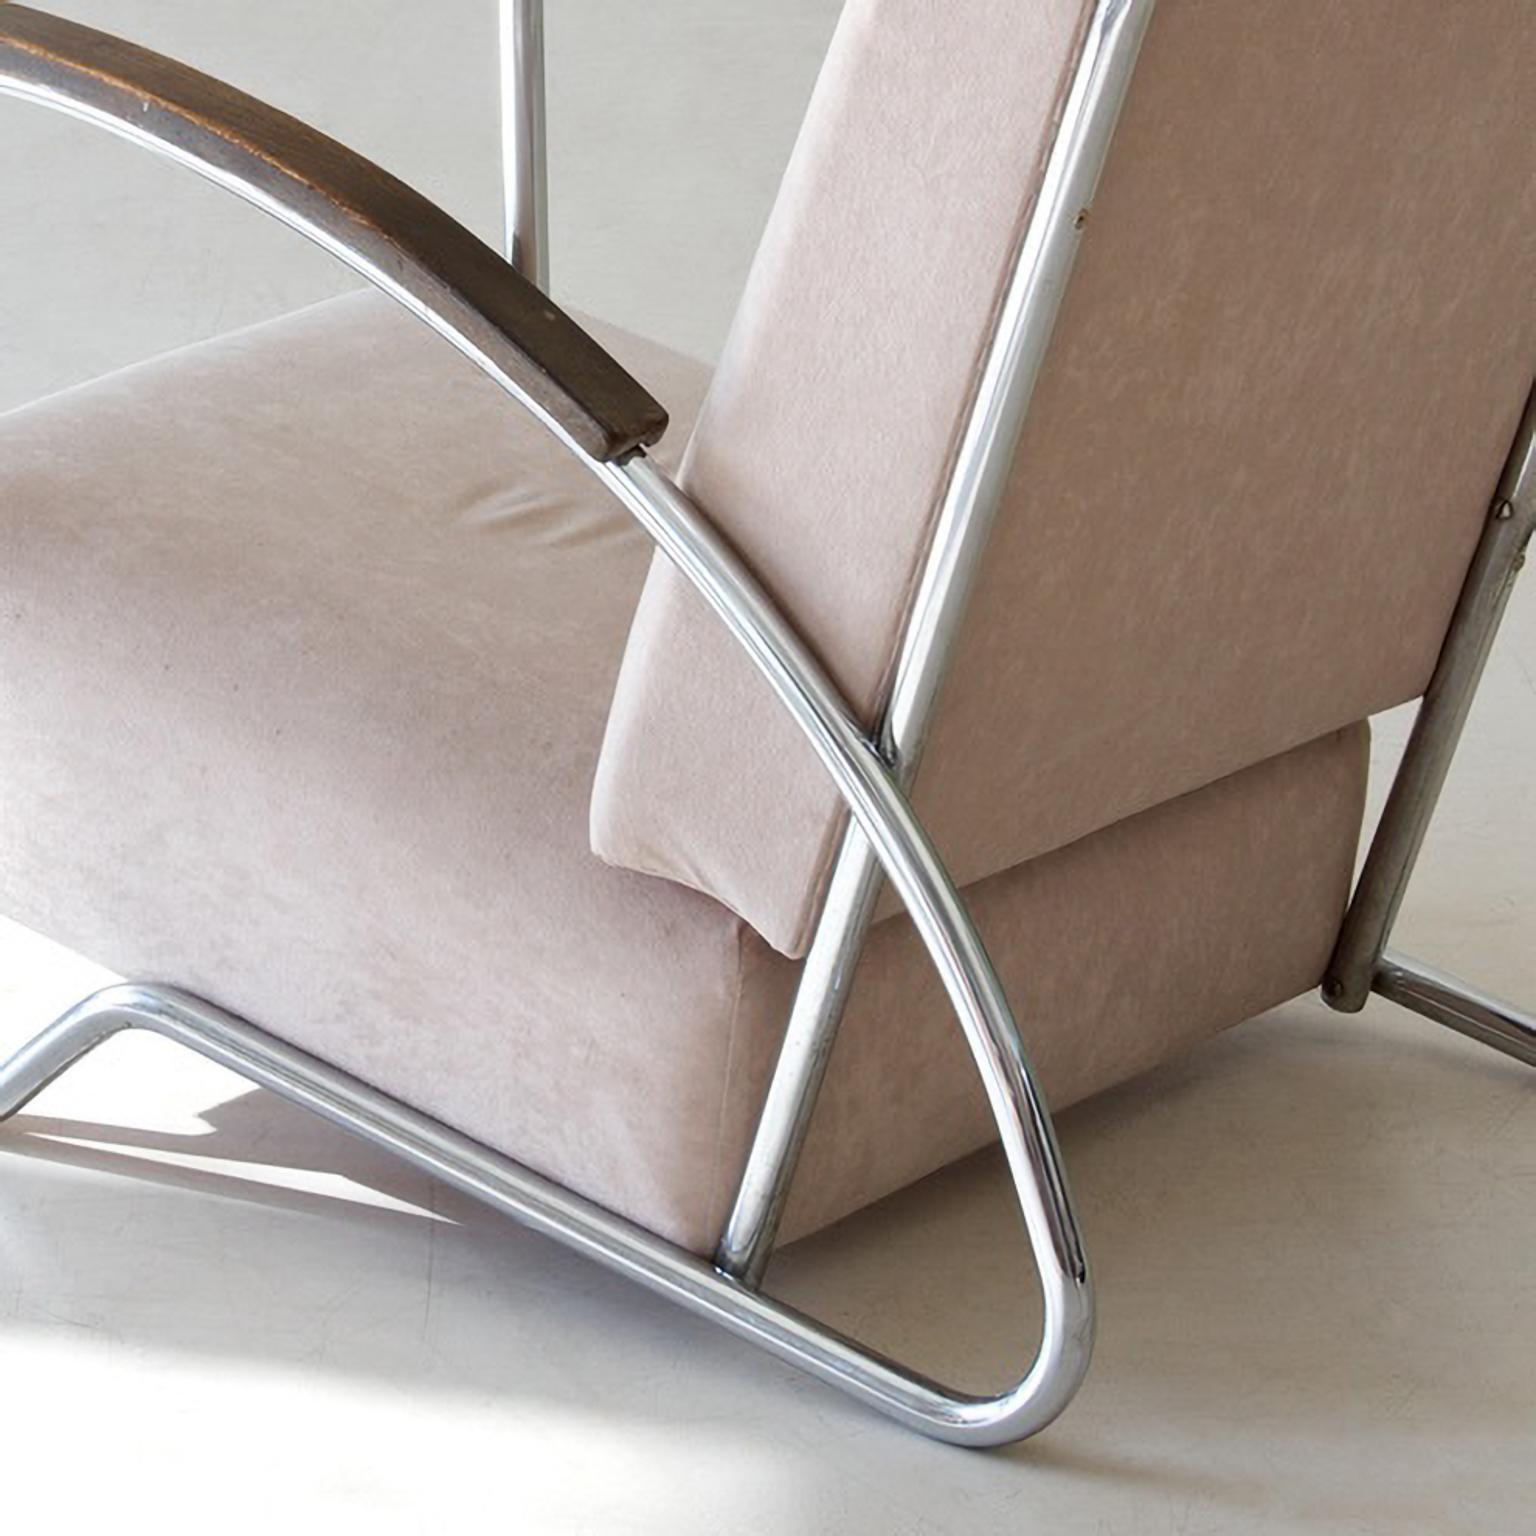 Mid-20th Century Modernist Tubular Steel Armchairs, Can Be Covered In Fabric Or Leather, c 1930 For Sale